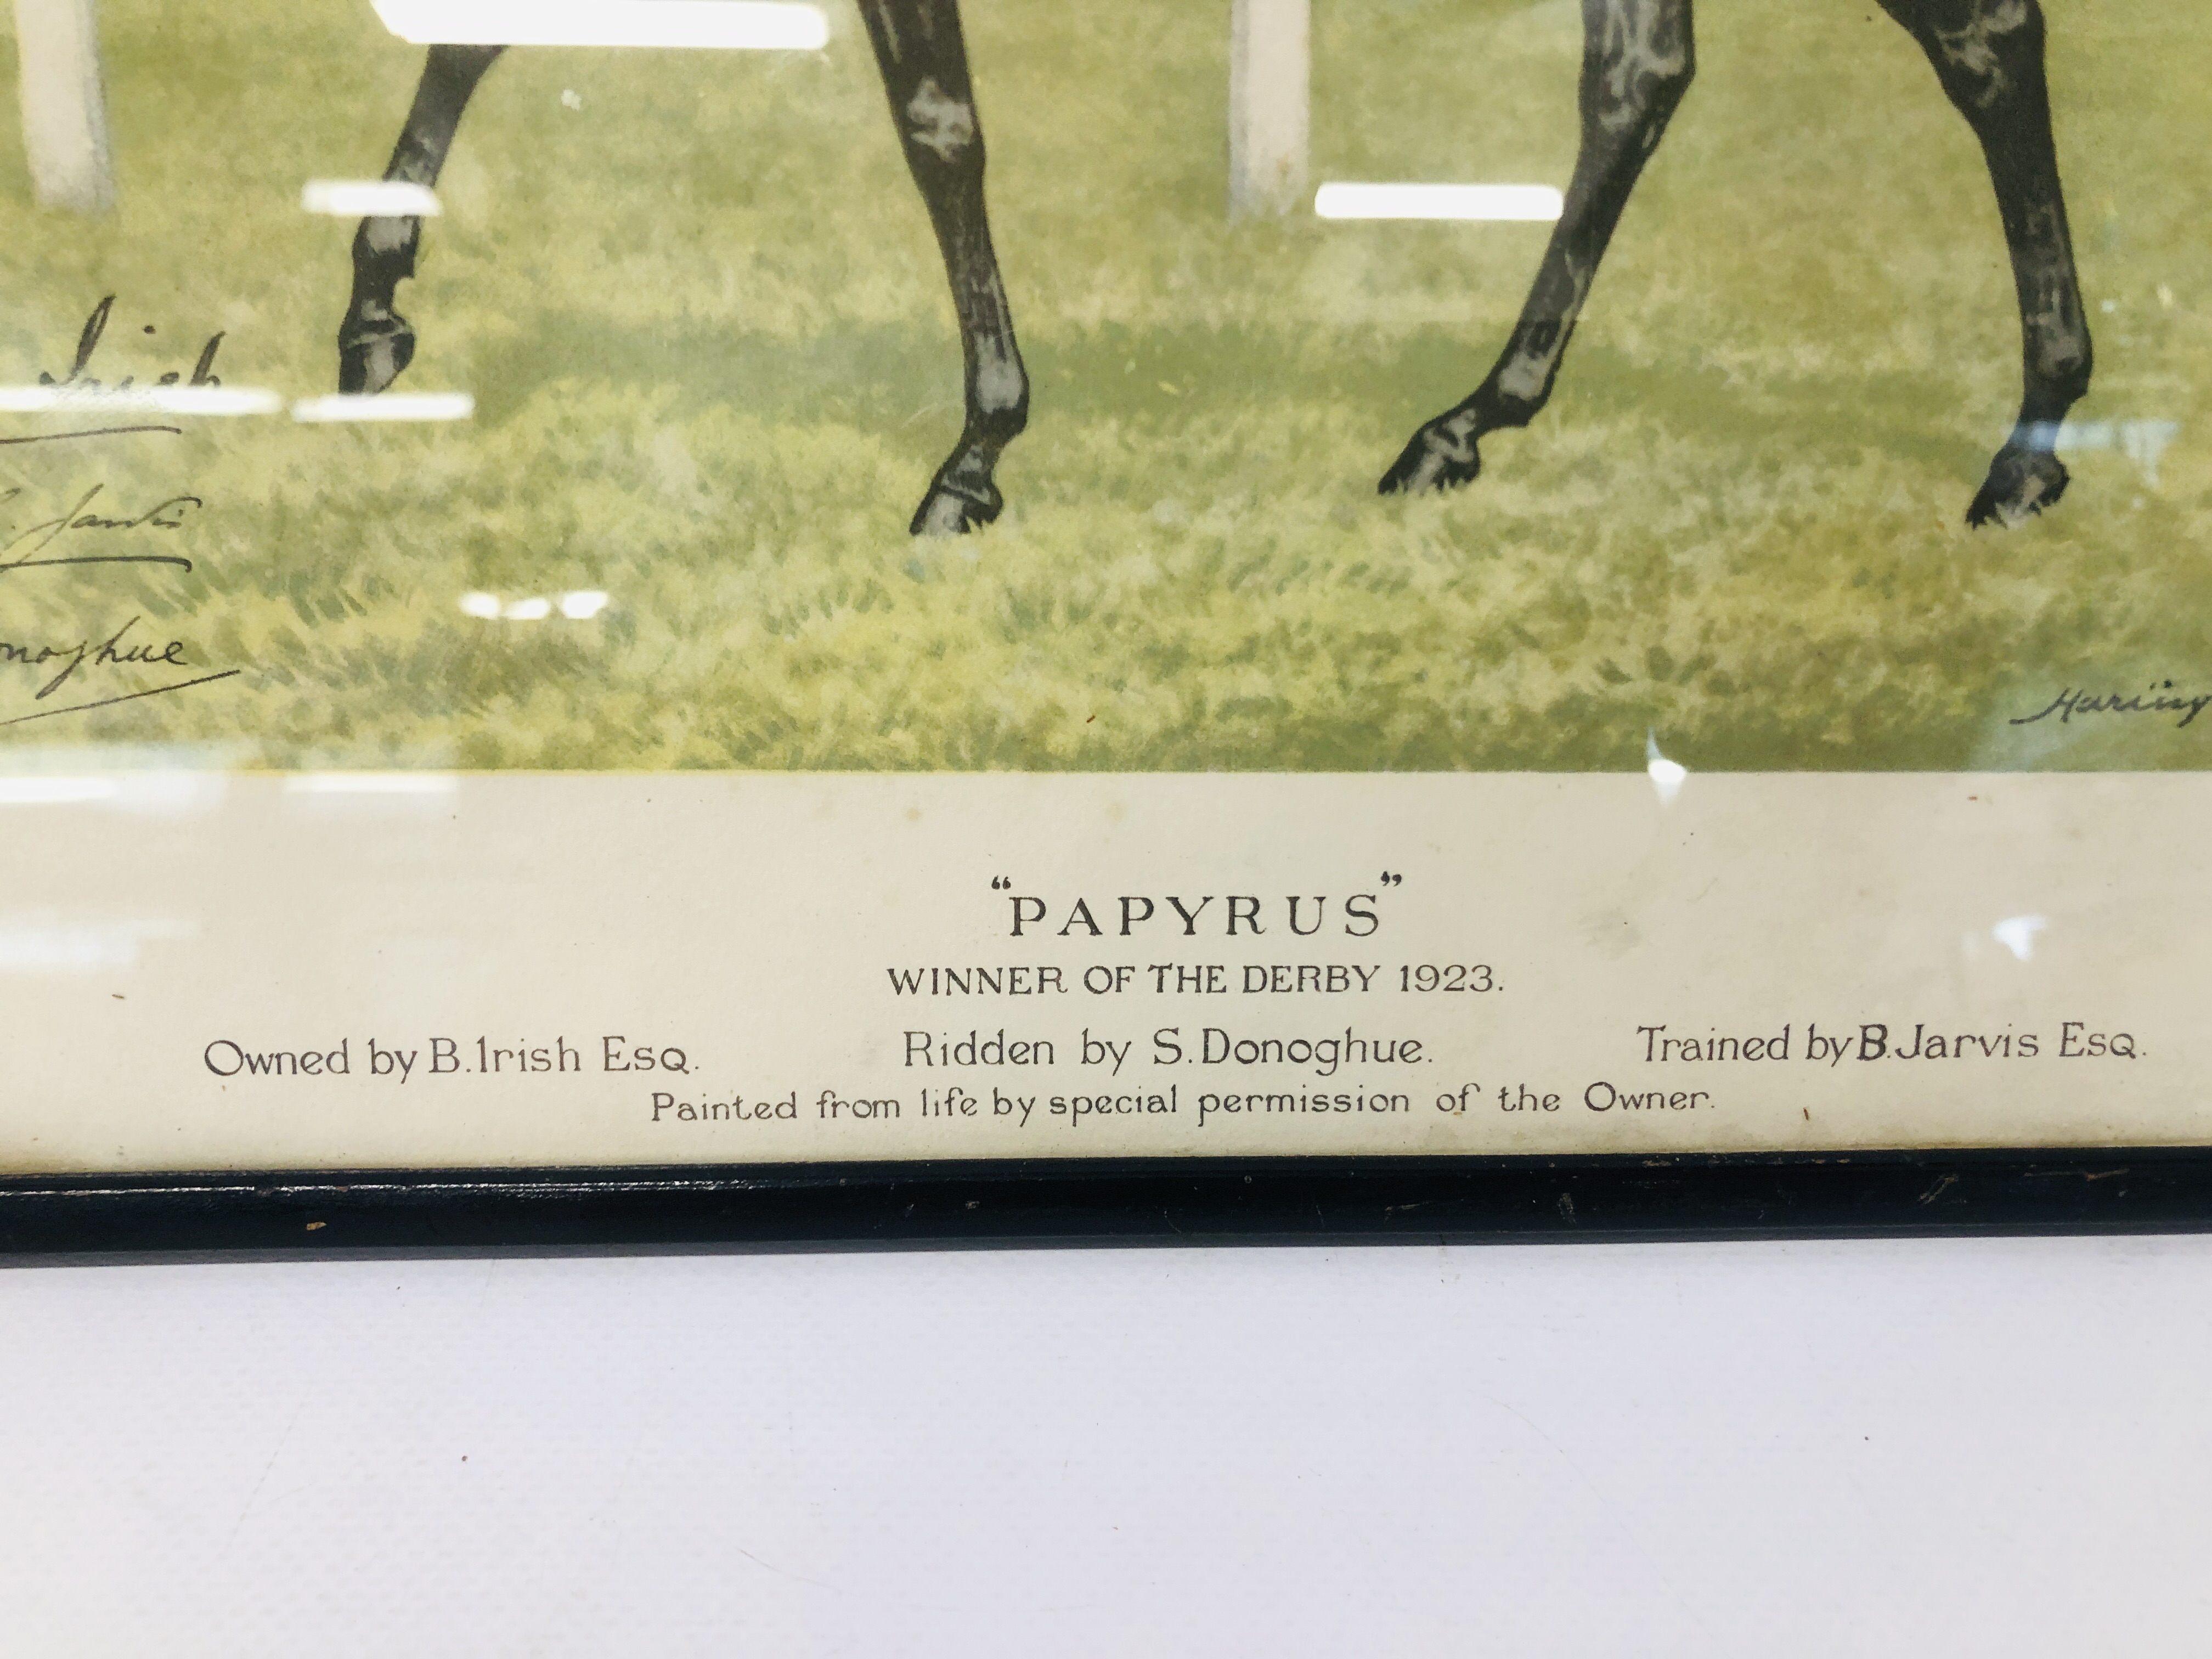 A FRAMED AND MOUNTED PRINT "PAPYRUS" WINNER OF THE DERBY 1923 RIDDEN BY DONOGHUE BEARING SIGNATURE - Image 2 of 4